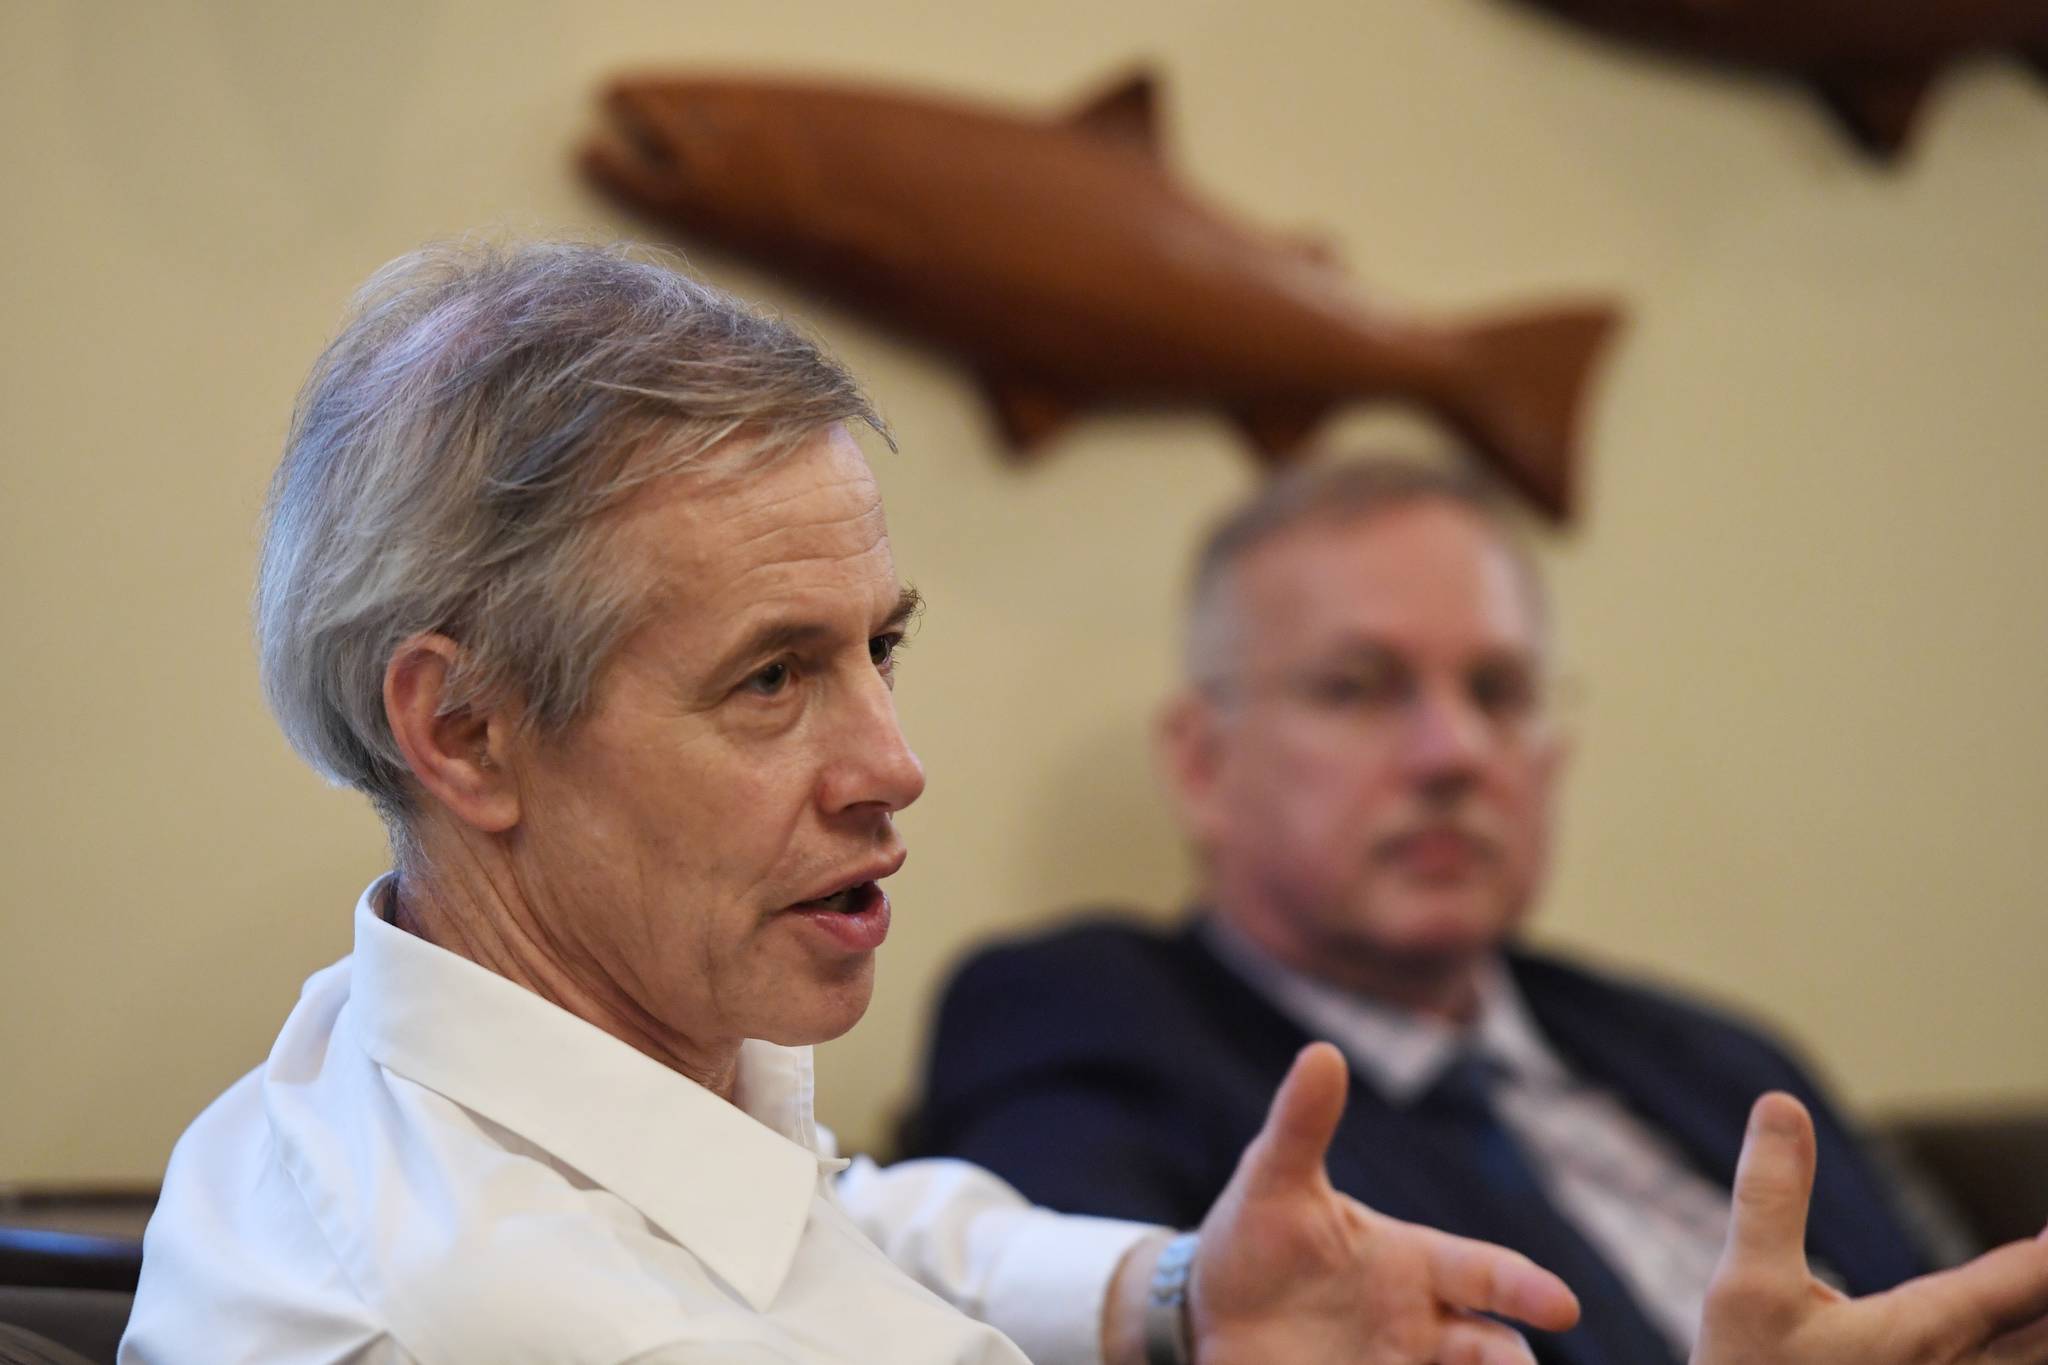 Rep. Matt Claman, D-Anchorage, left, speaks about the process of building a crime bill as Speaker of the House Bryce Edgmon, I-Dillingham, listens at the Capitol on Thursday, May 16, 2019. (Michael Penn | Juneau Empire)